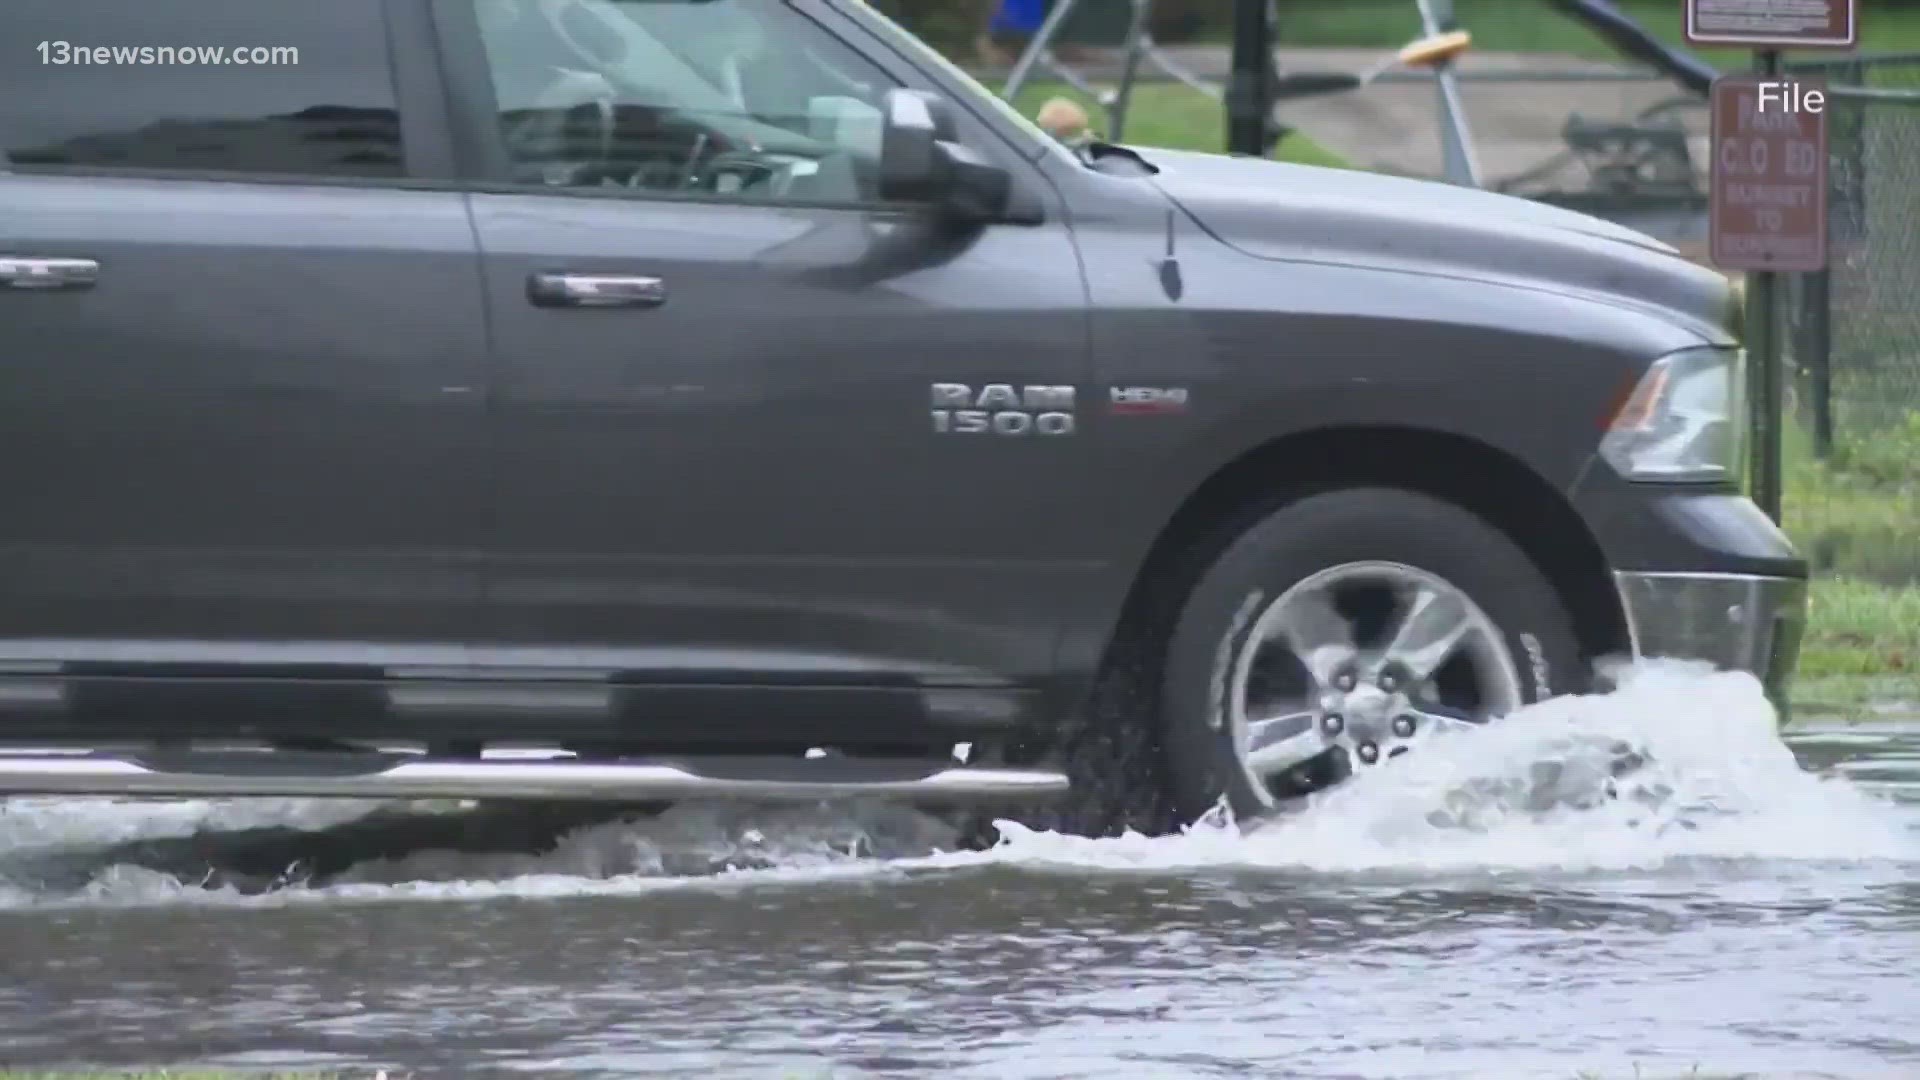 There's a new project to keep you safe on the roads when the water starts to rise.